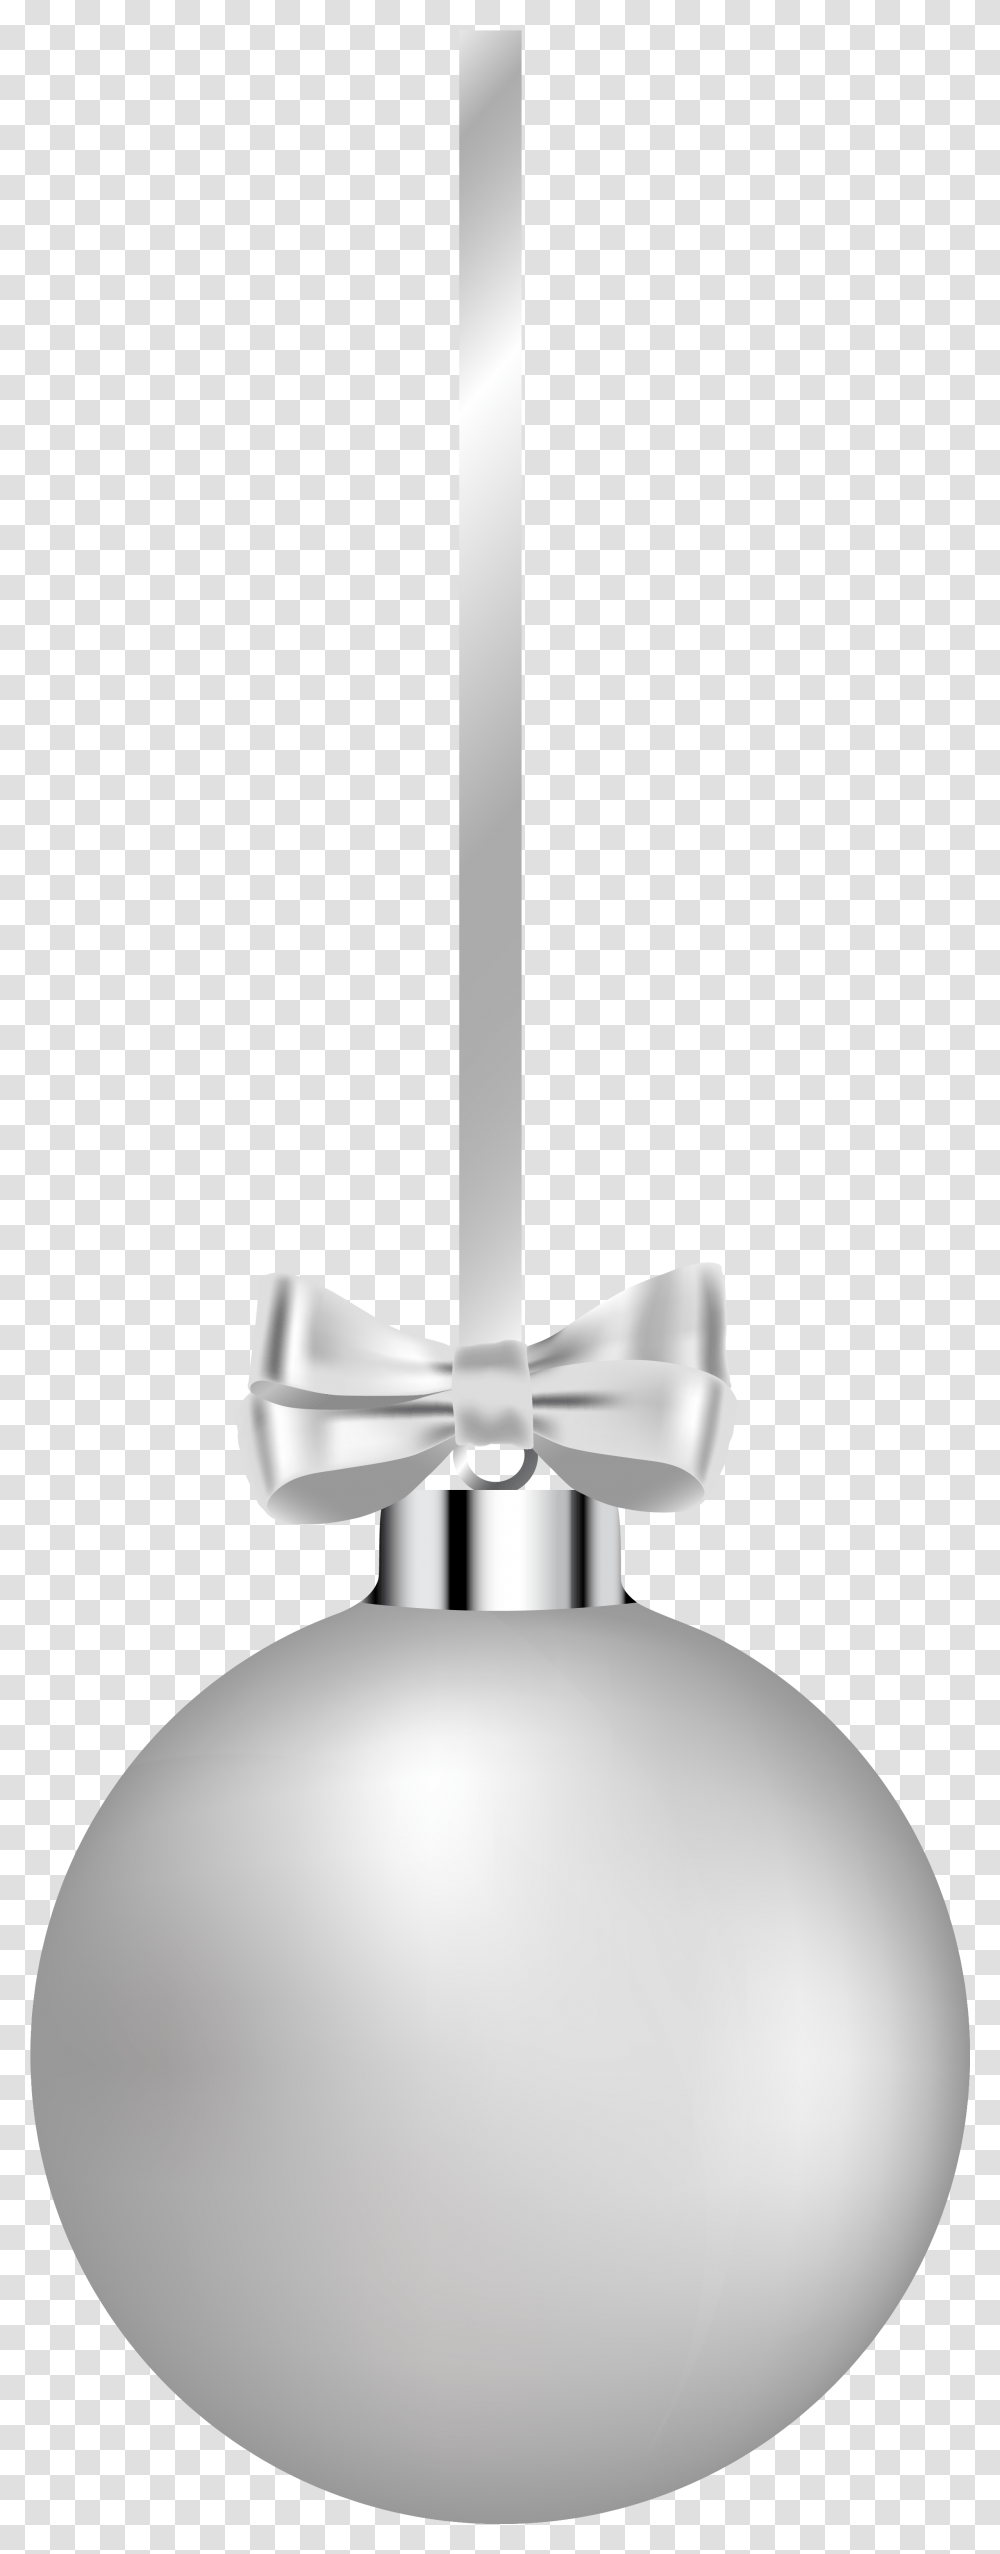 White Hanging Christmas Ball Clipart Image Hanging Christmas Ball Clipart, Lamp, Tie, Accessories, Accessory Transparent Png